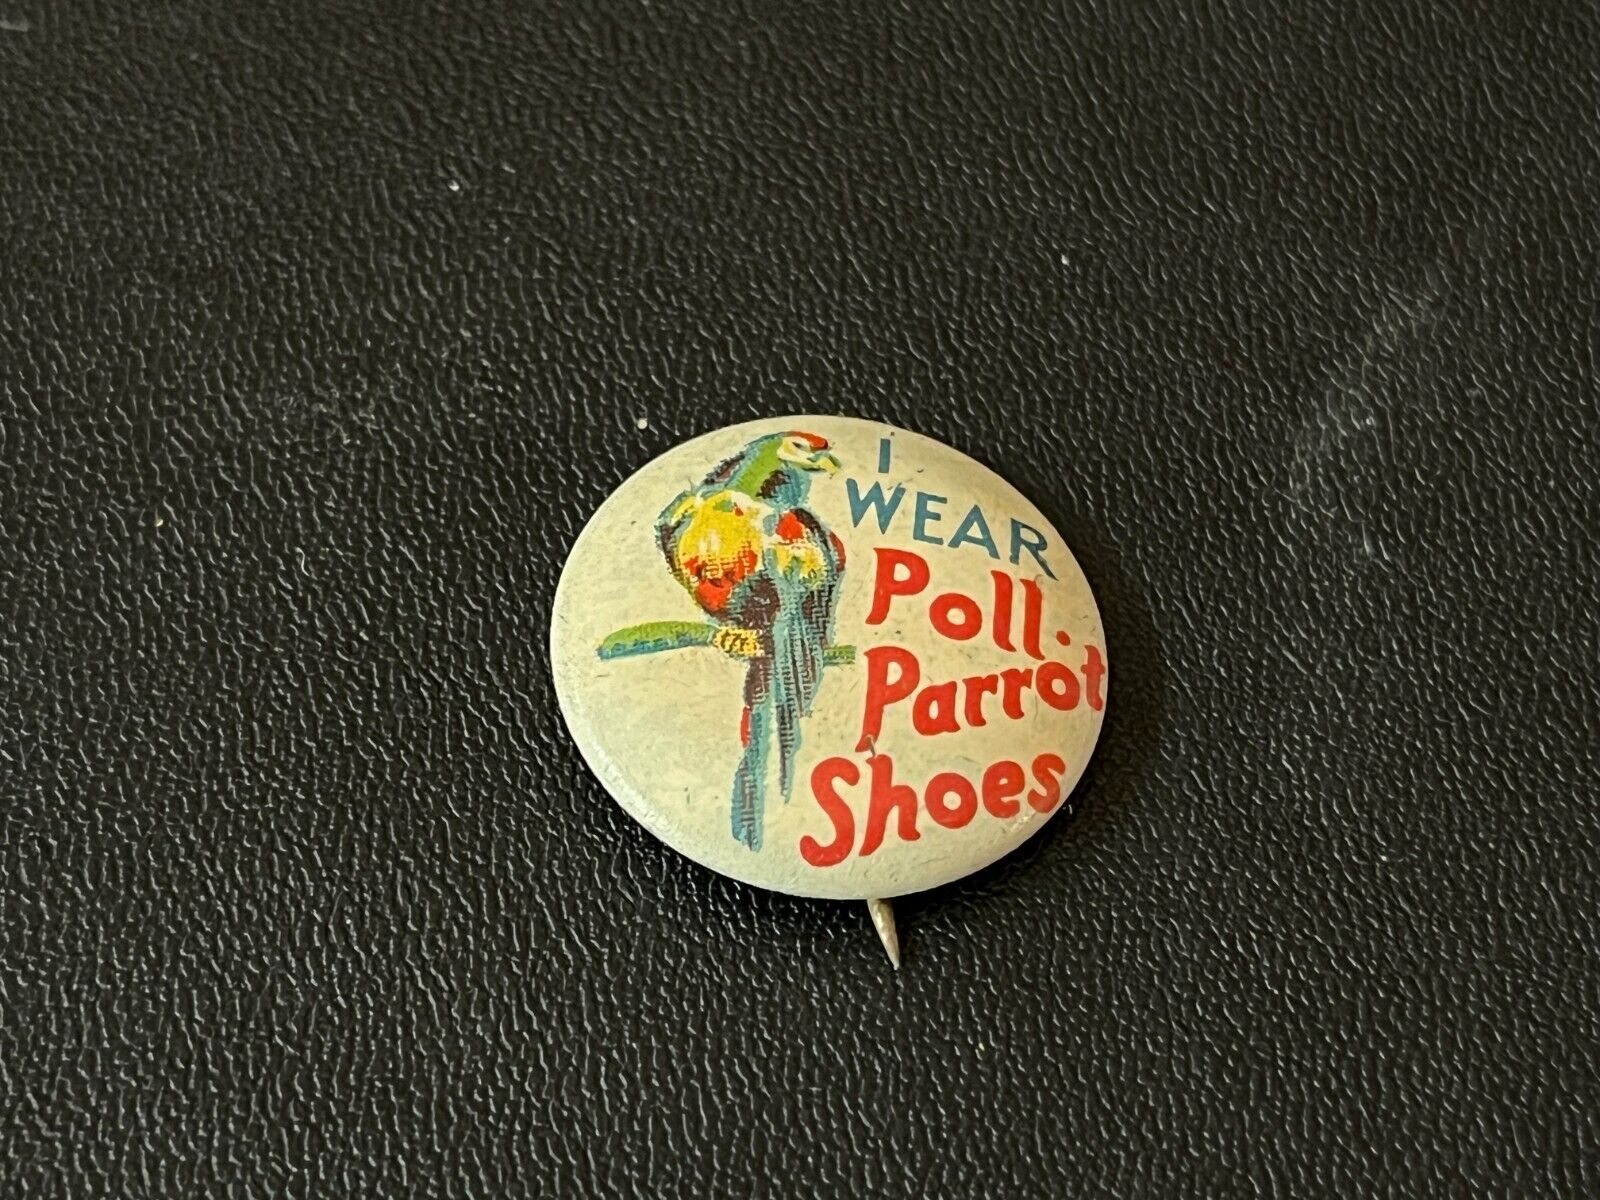 Vtg  I Wear Poll Parrot Shoes Advertising Pinback ~ Back of Pin has Add Also ~